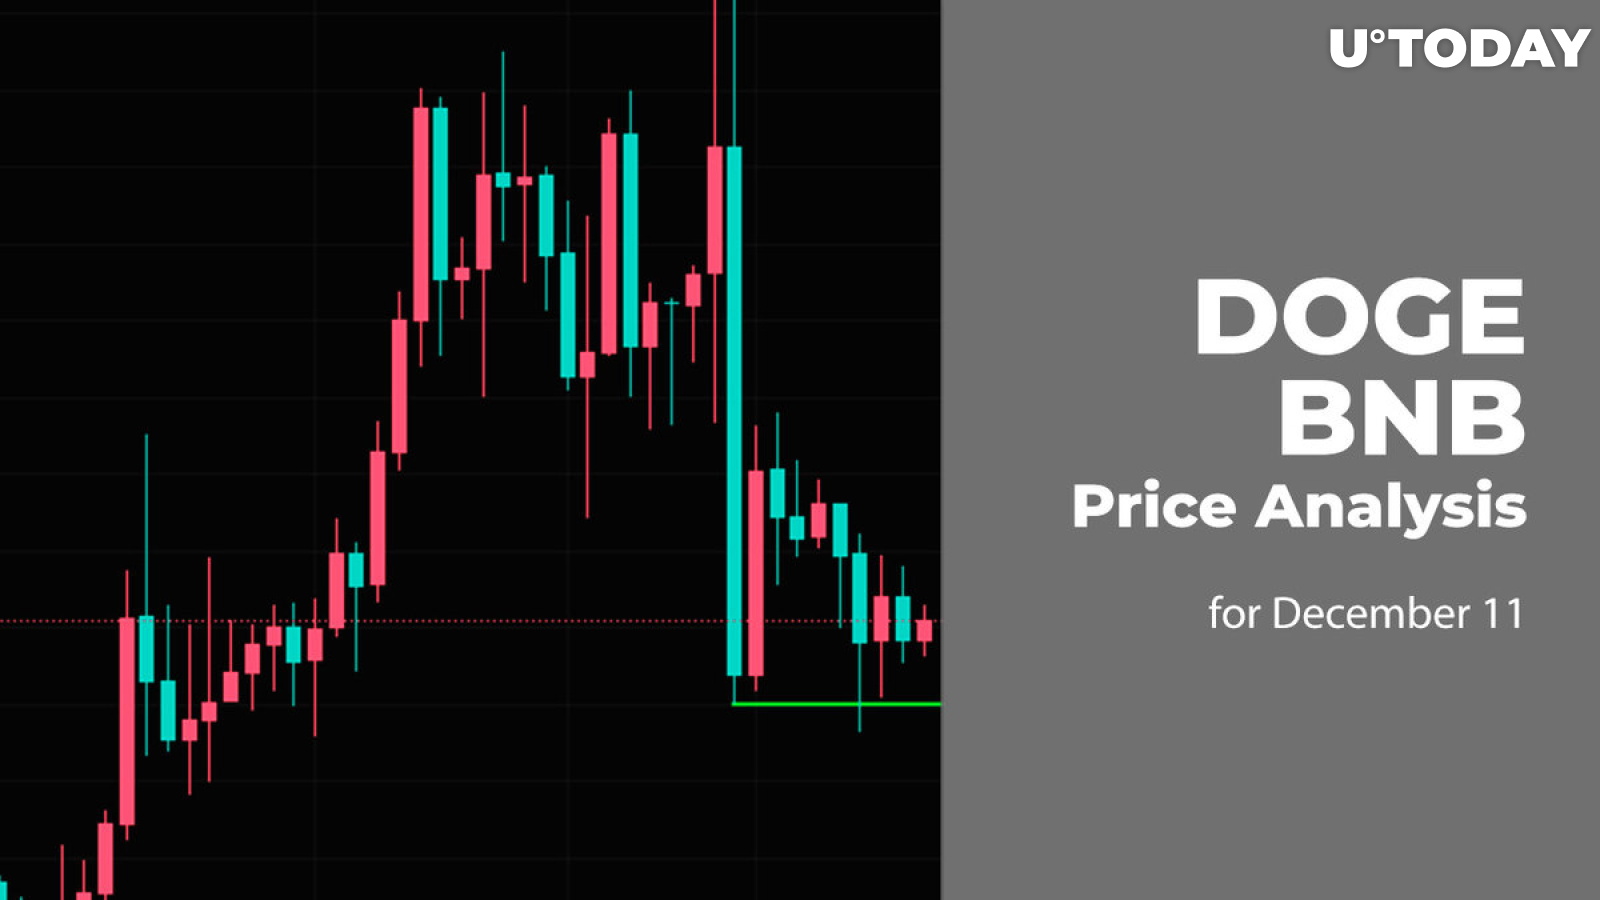 DOGE and BNB Price Analysis for December 11